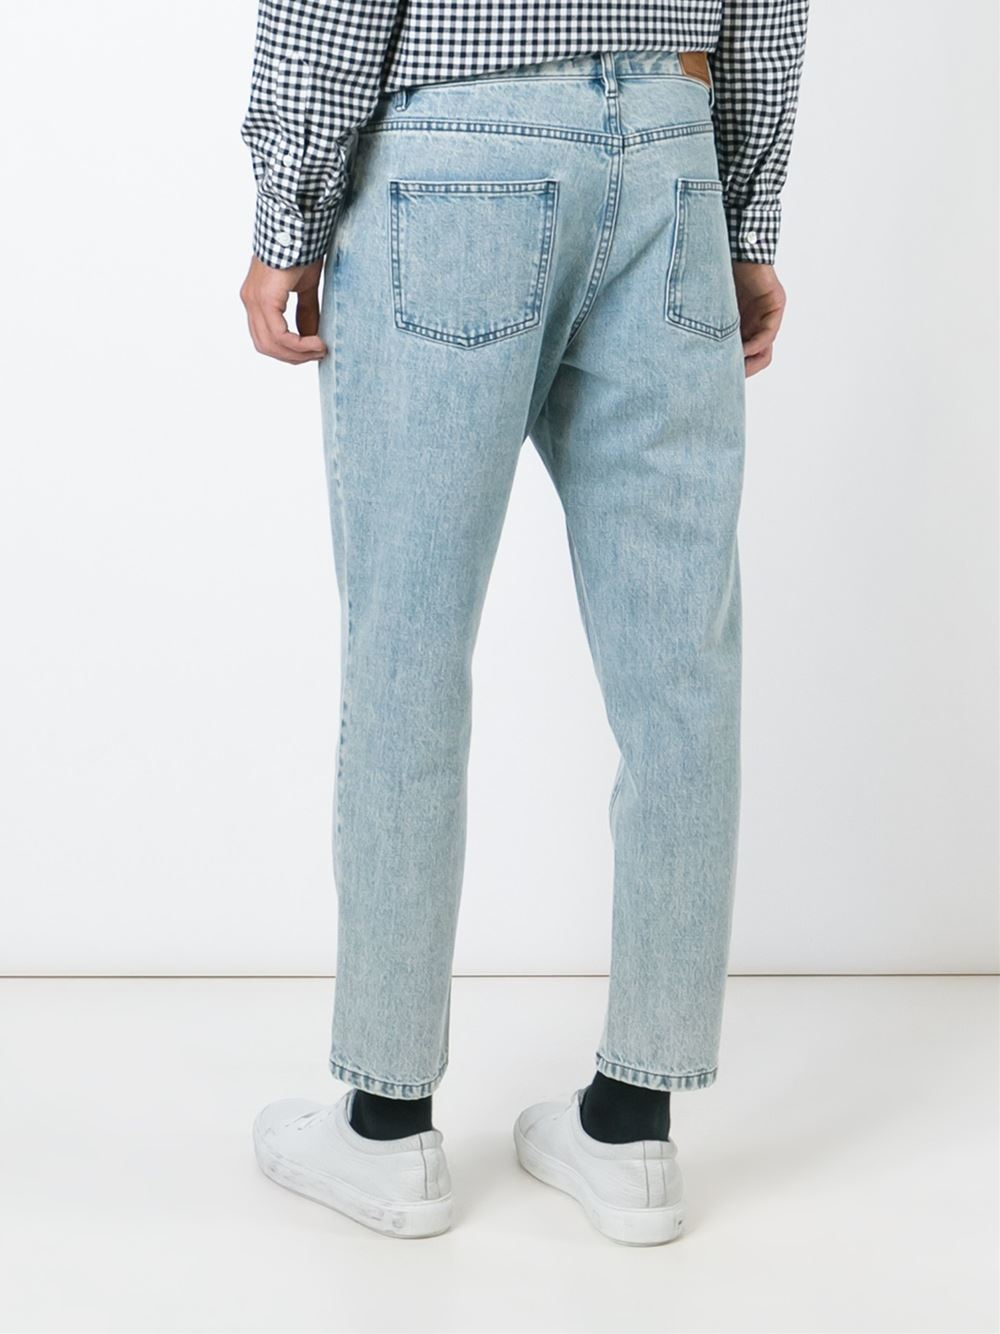 Lyst - AMI Cropped Jeans in Blue for Men